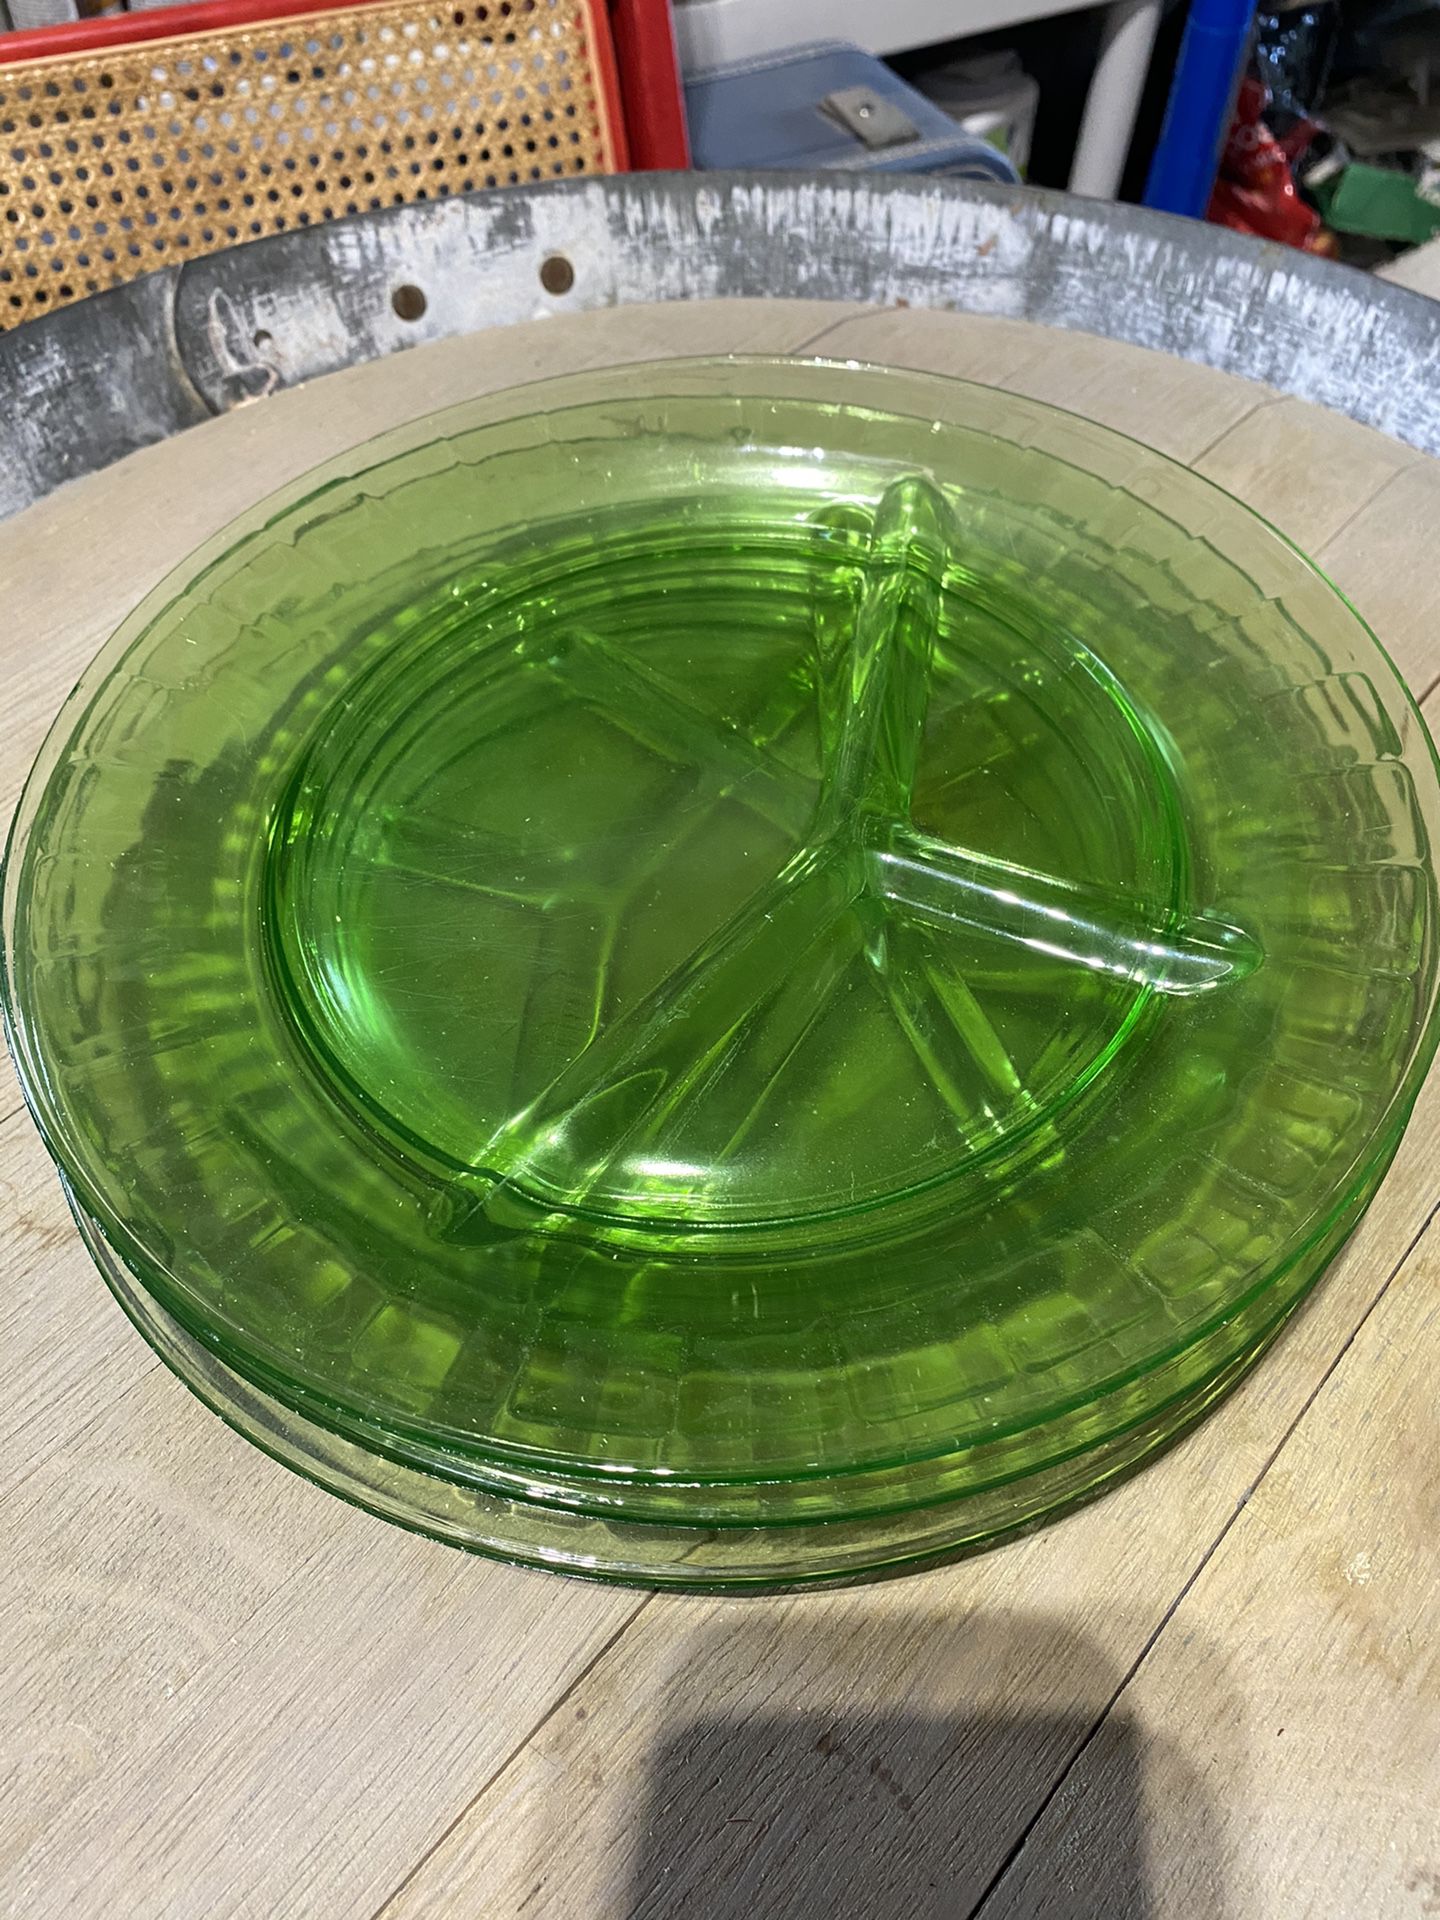 Vintage Antique End Table Green Glass Depresion Plates Dishes Butter Mold Frame Iron